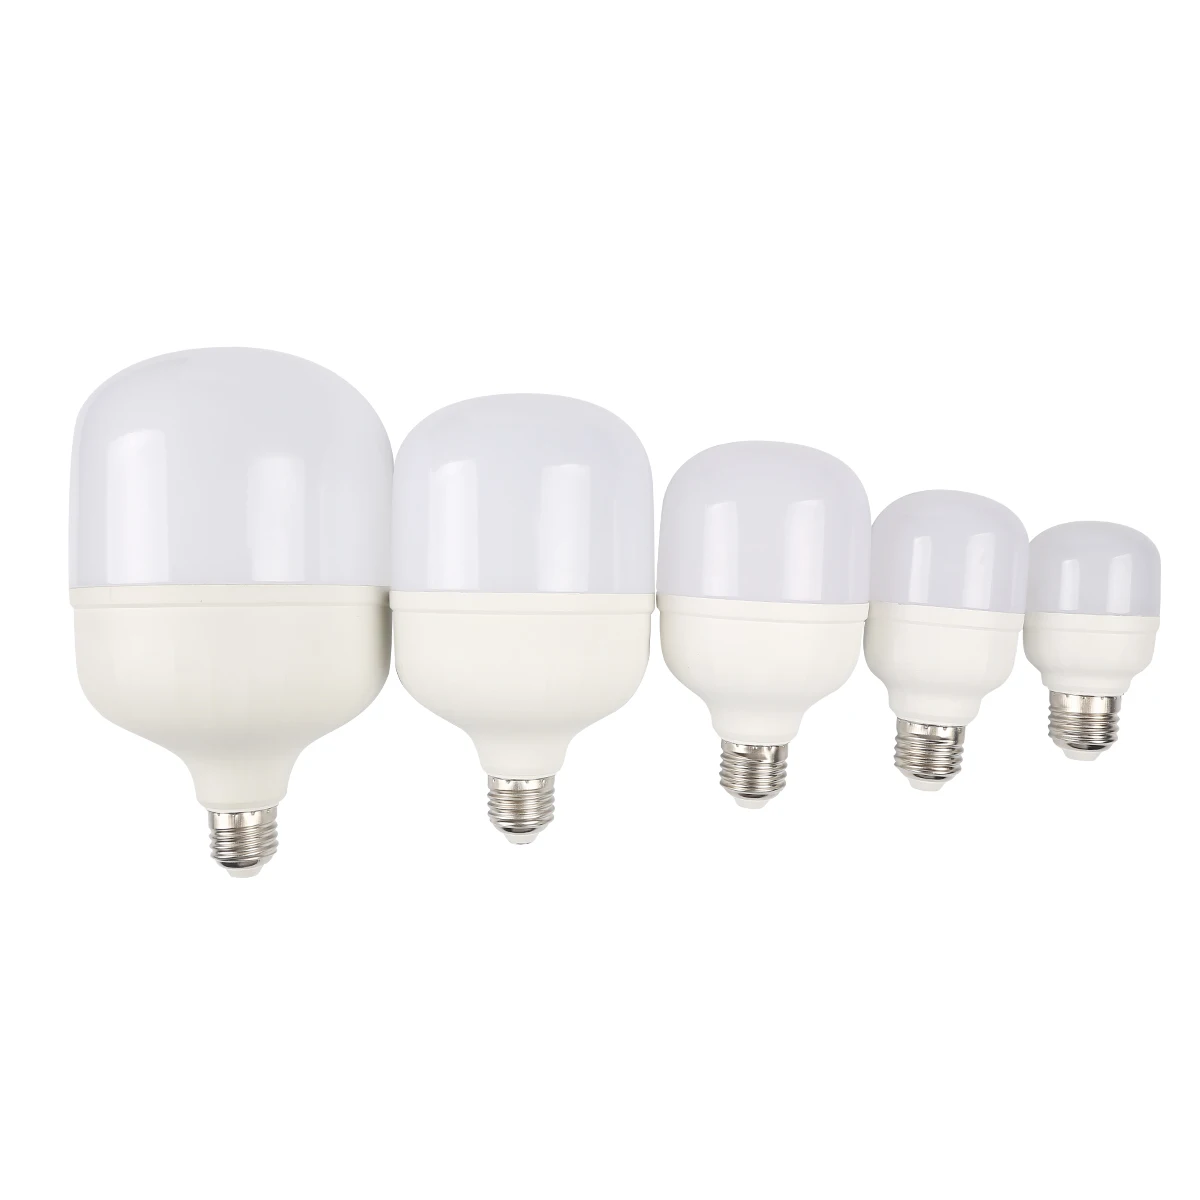 Chinese manufacturer hot sale product e27 7w 9w lamp led bulb